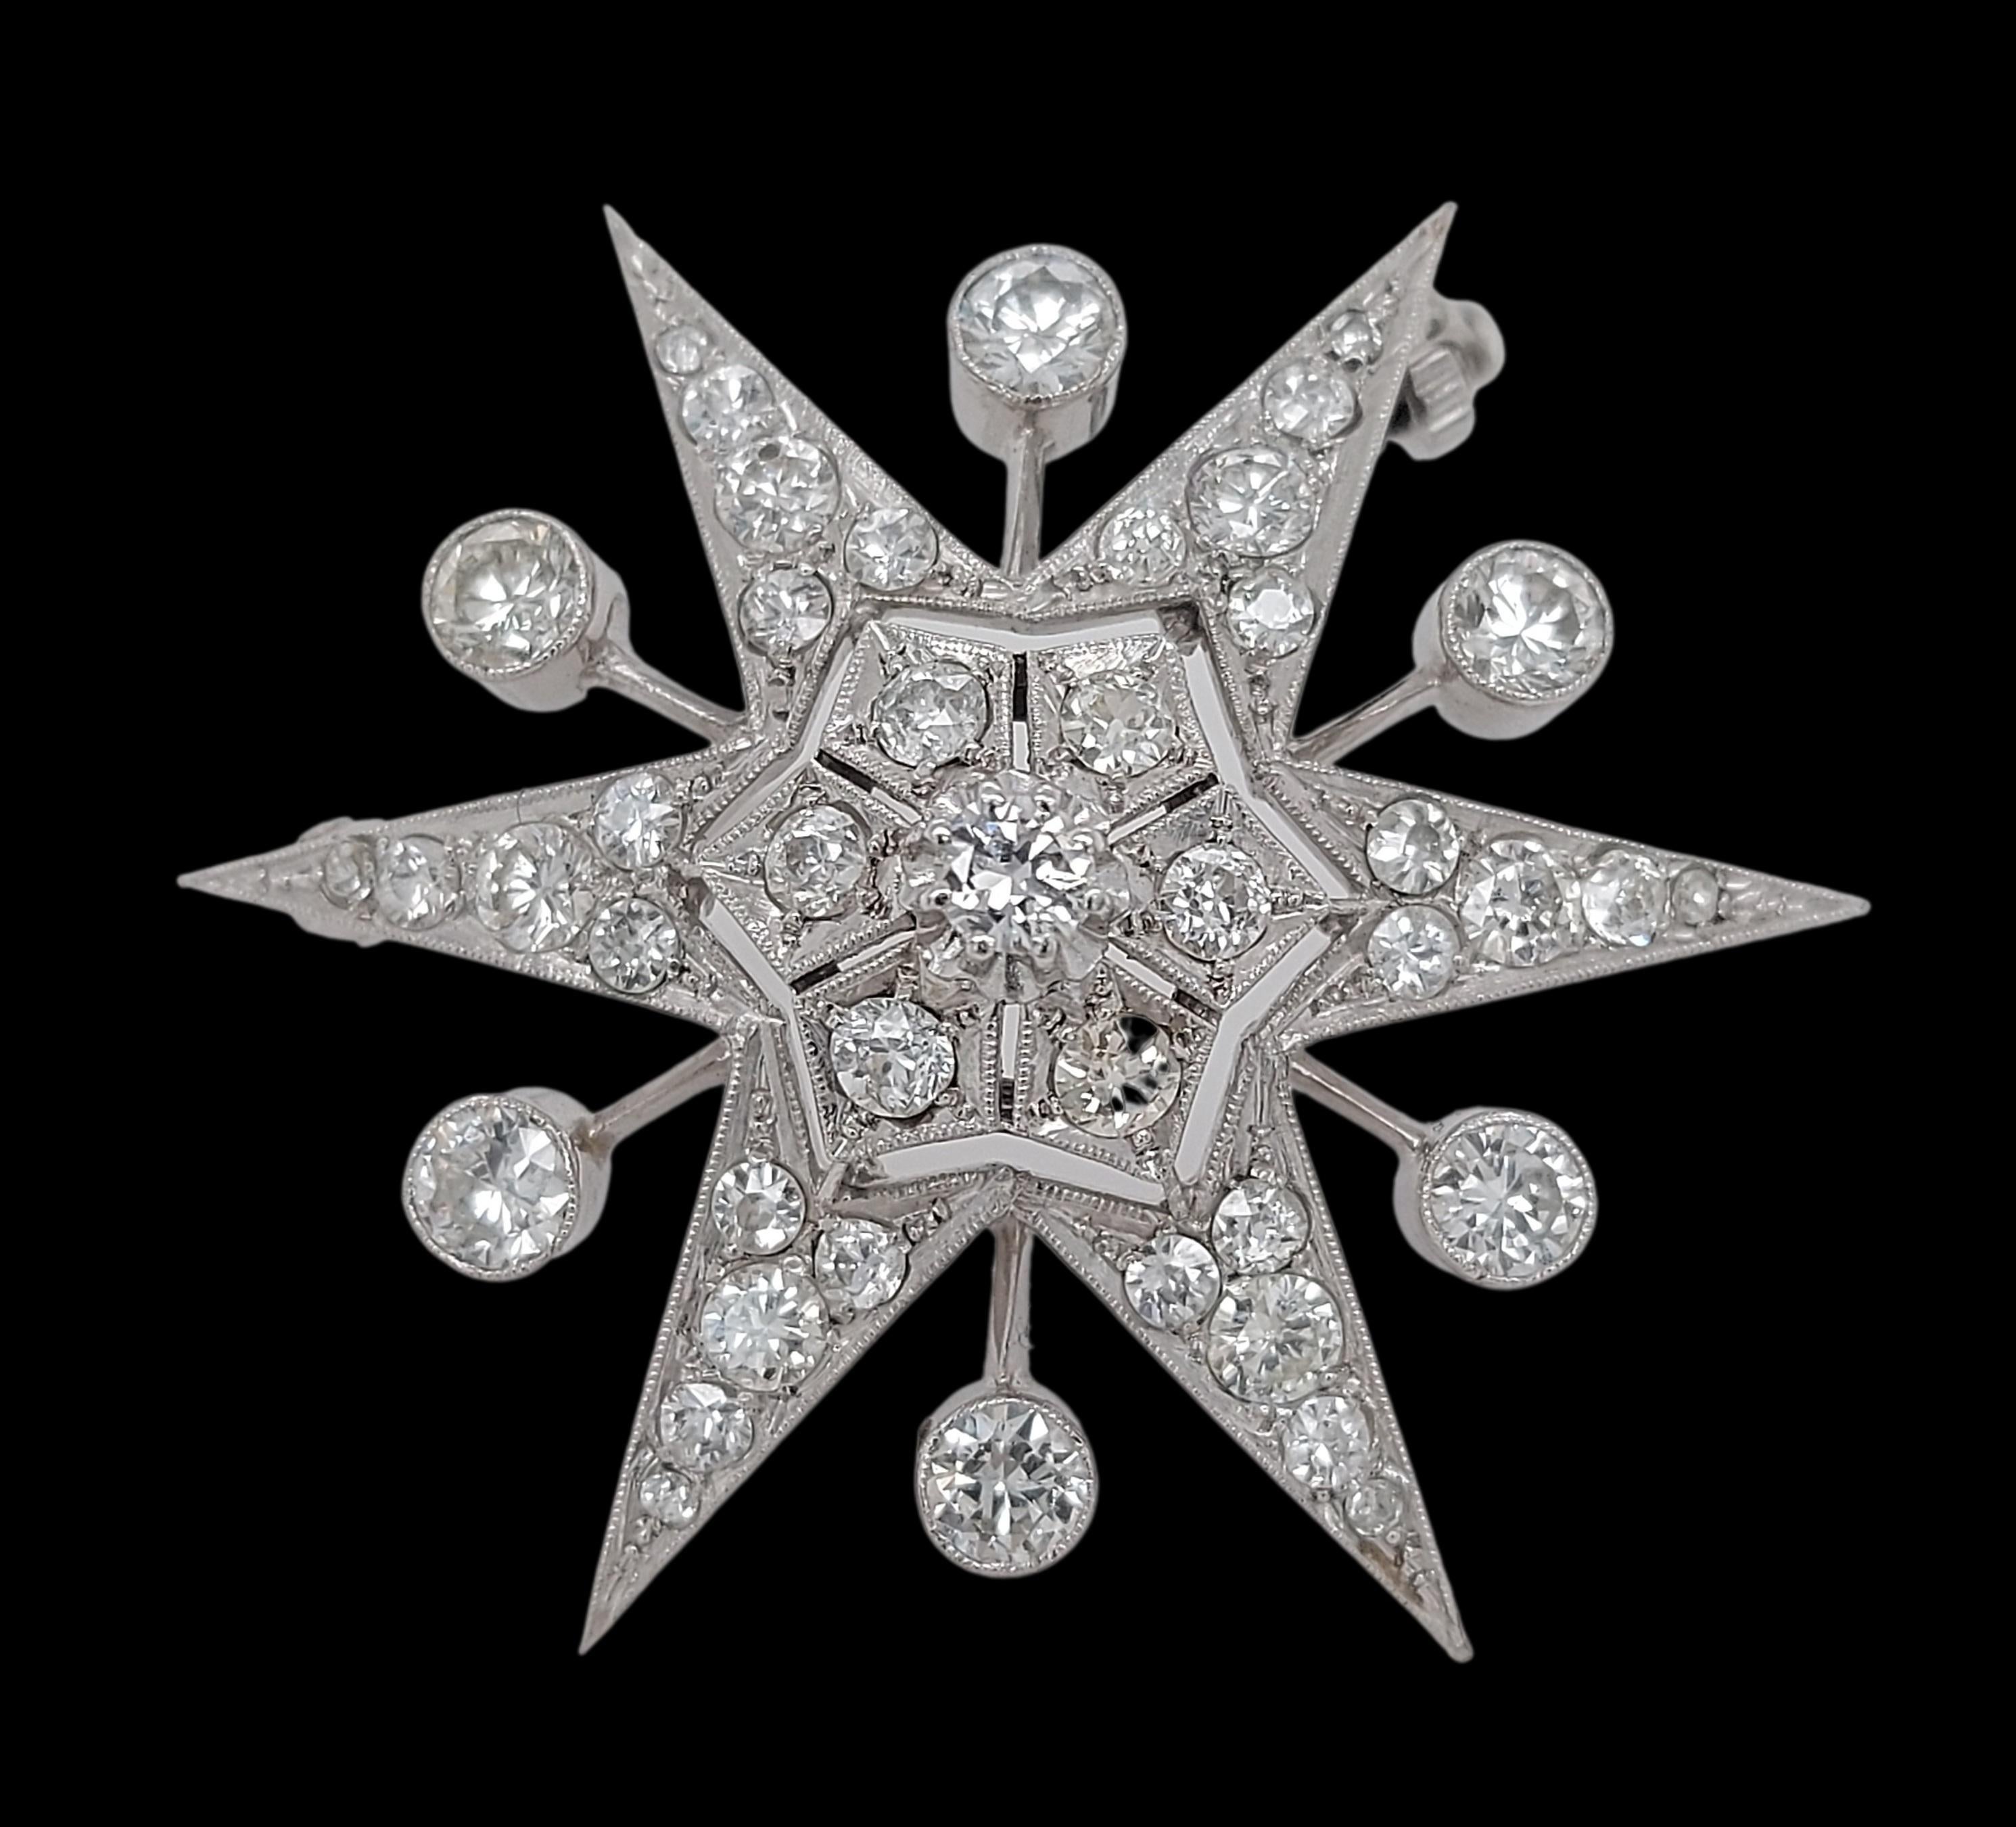 Glamorous 18kt White Gold Star Shape Brooch/Pendant With 3.8ct Diamonds

Magnificent Brooch which transforms into a hanger when adding a chain.

Diamonds: Old mine cut diamonds together approx. 3.8ct 

Material: 18kt white gold

Weight: 9.5 grams /